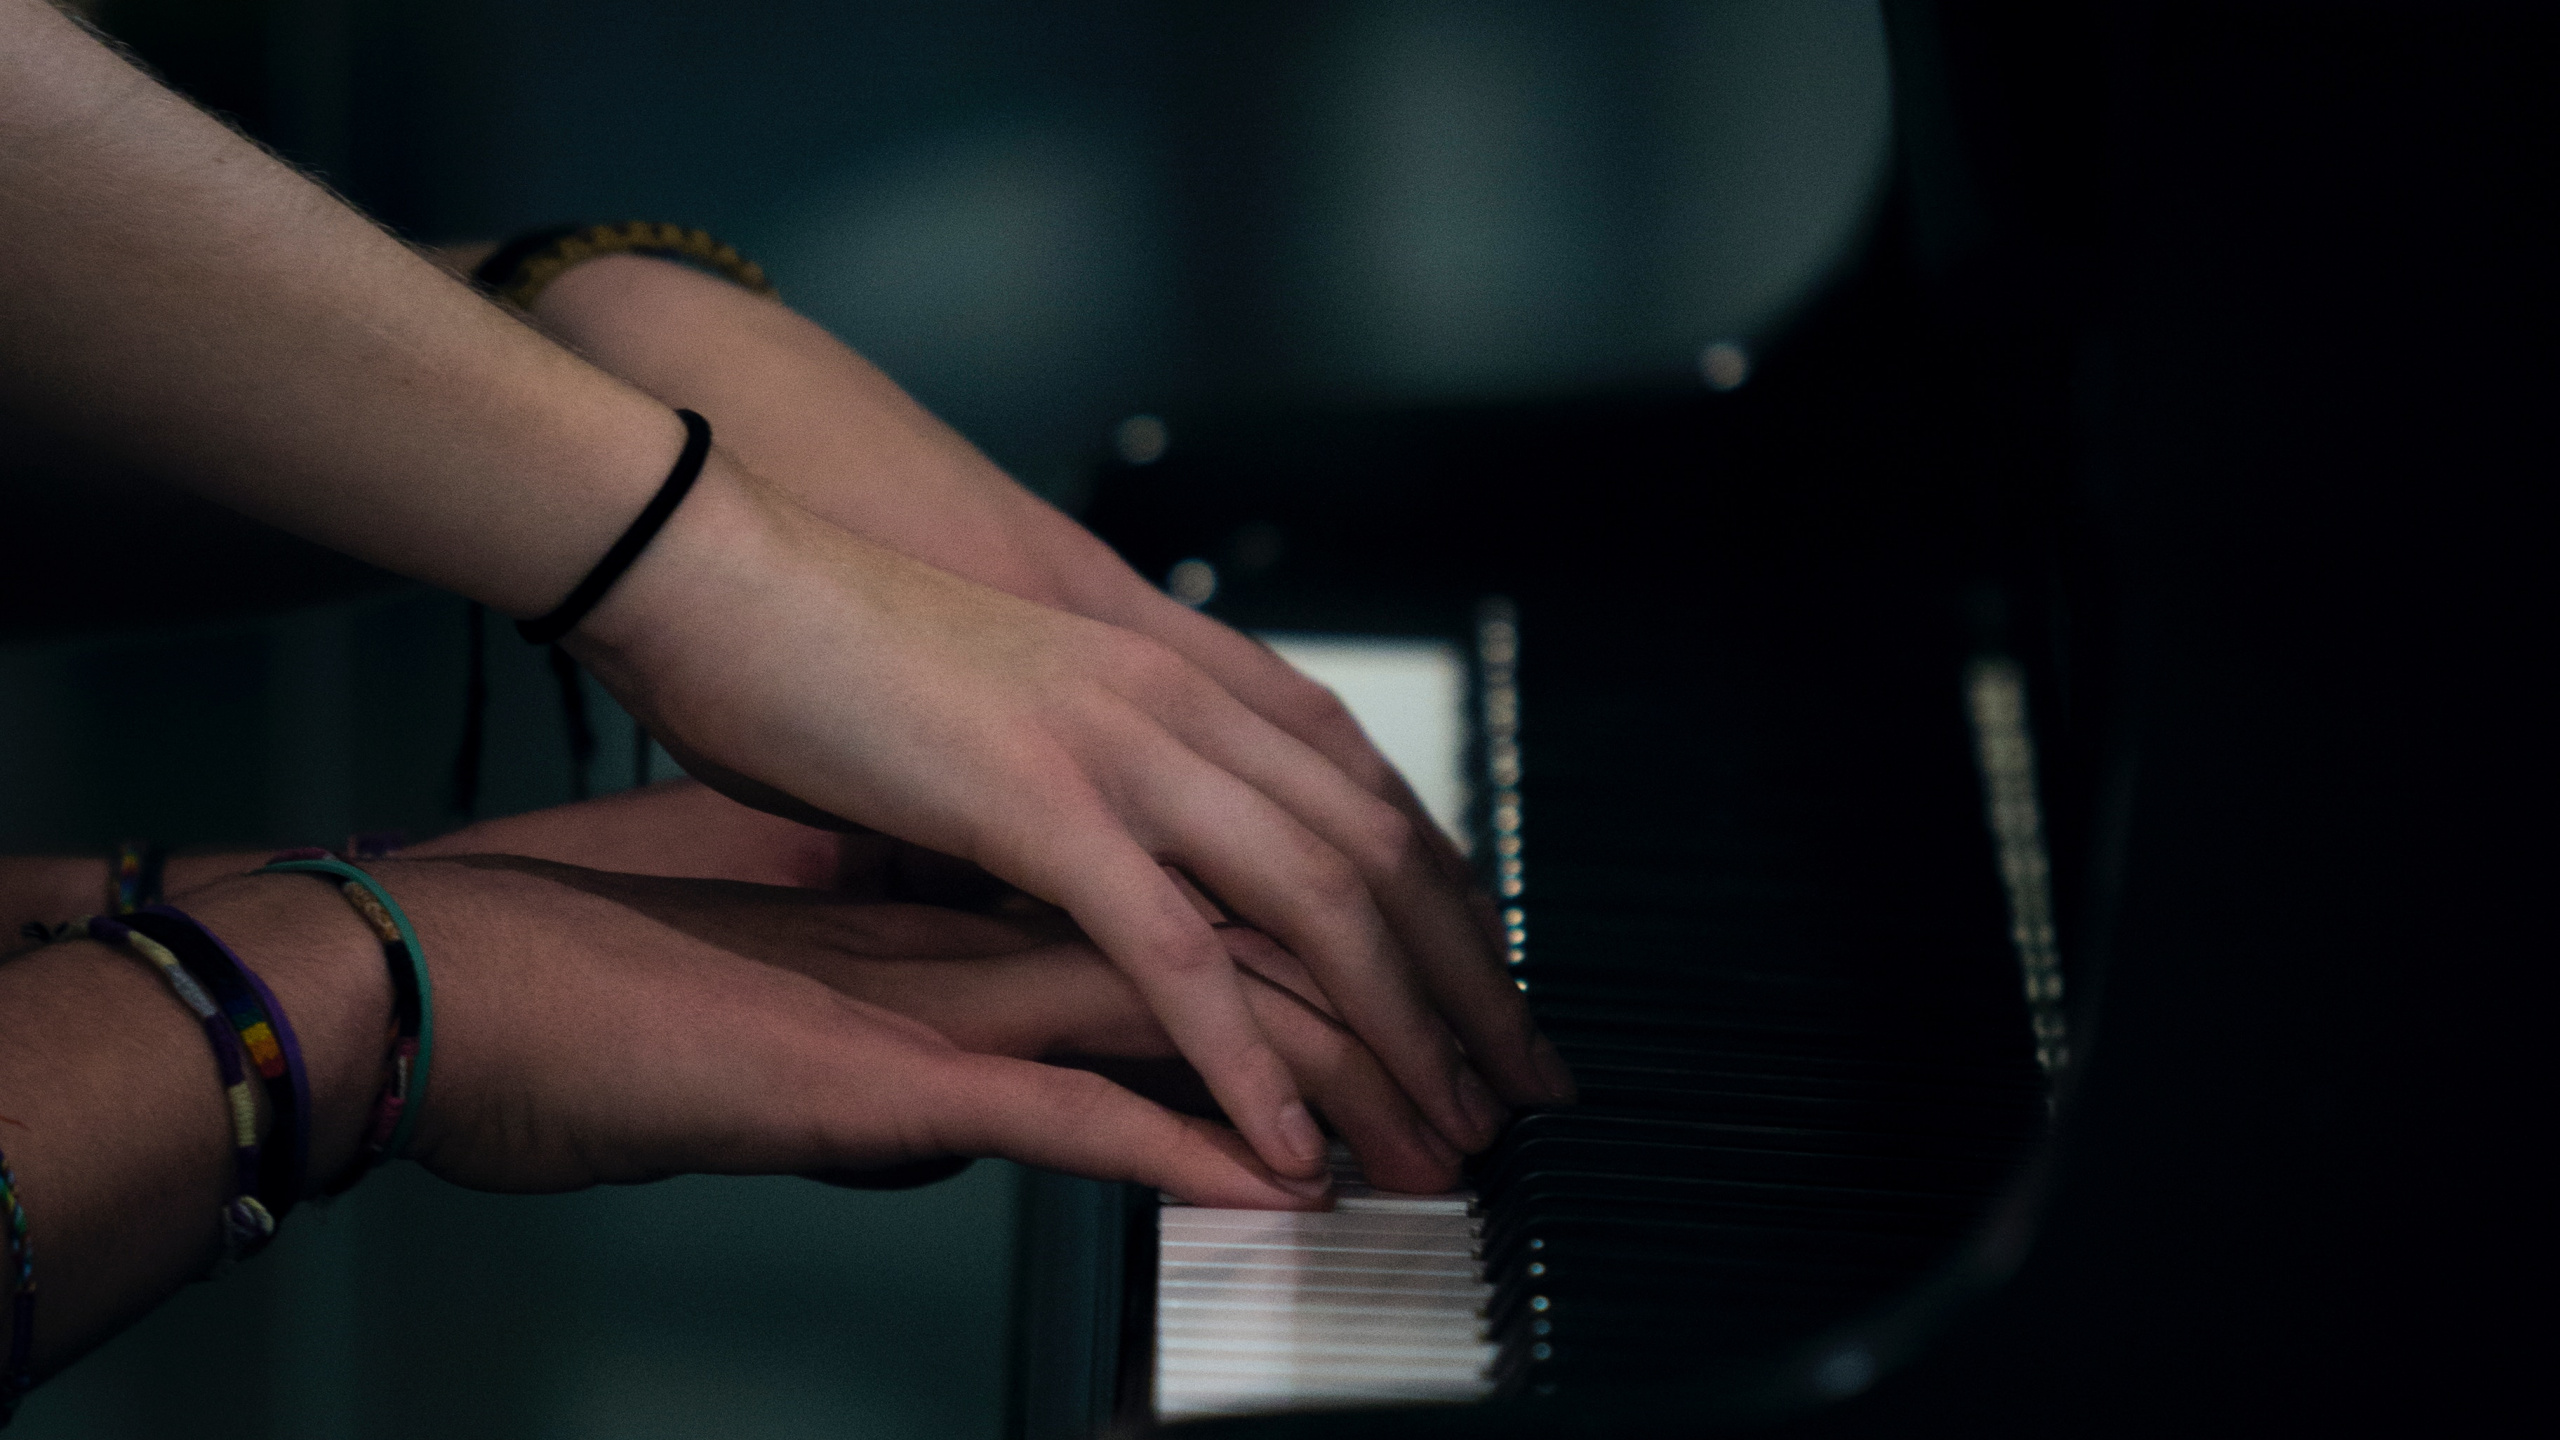 Piano, Pianist, Hand, Musician, Arm. Wallpaper in 2560x1440 Resolution